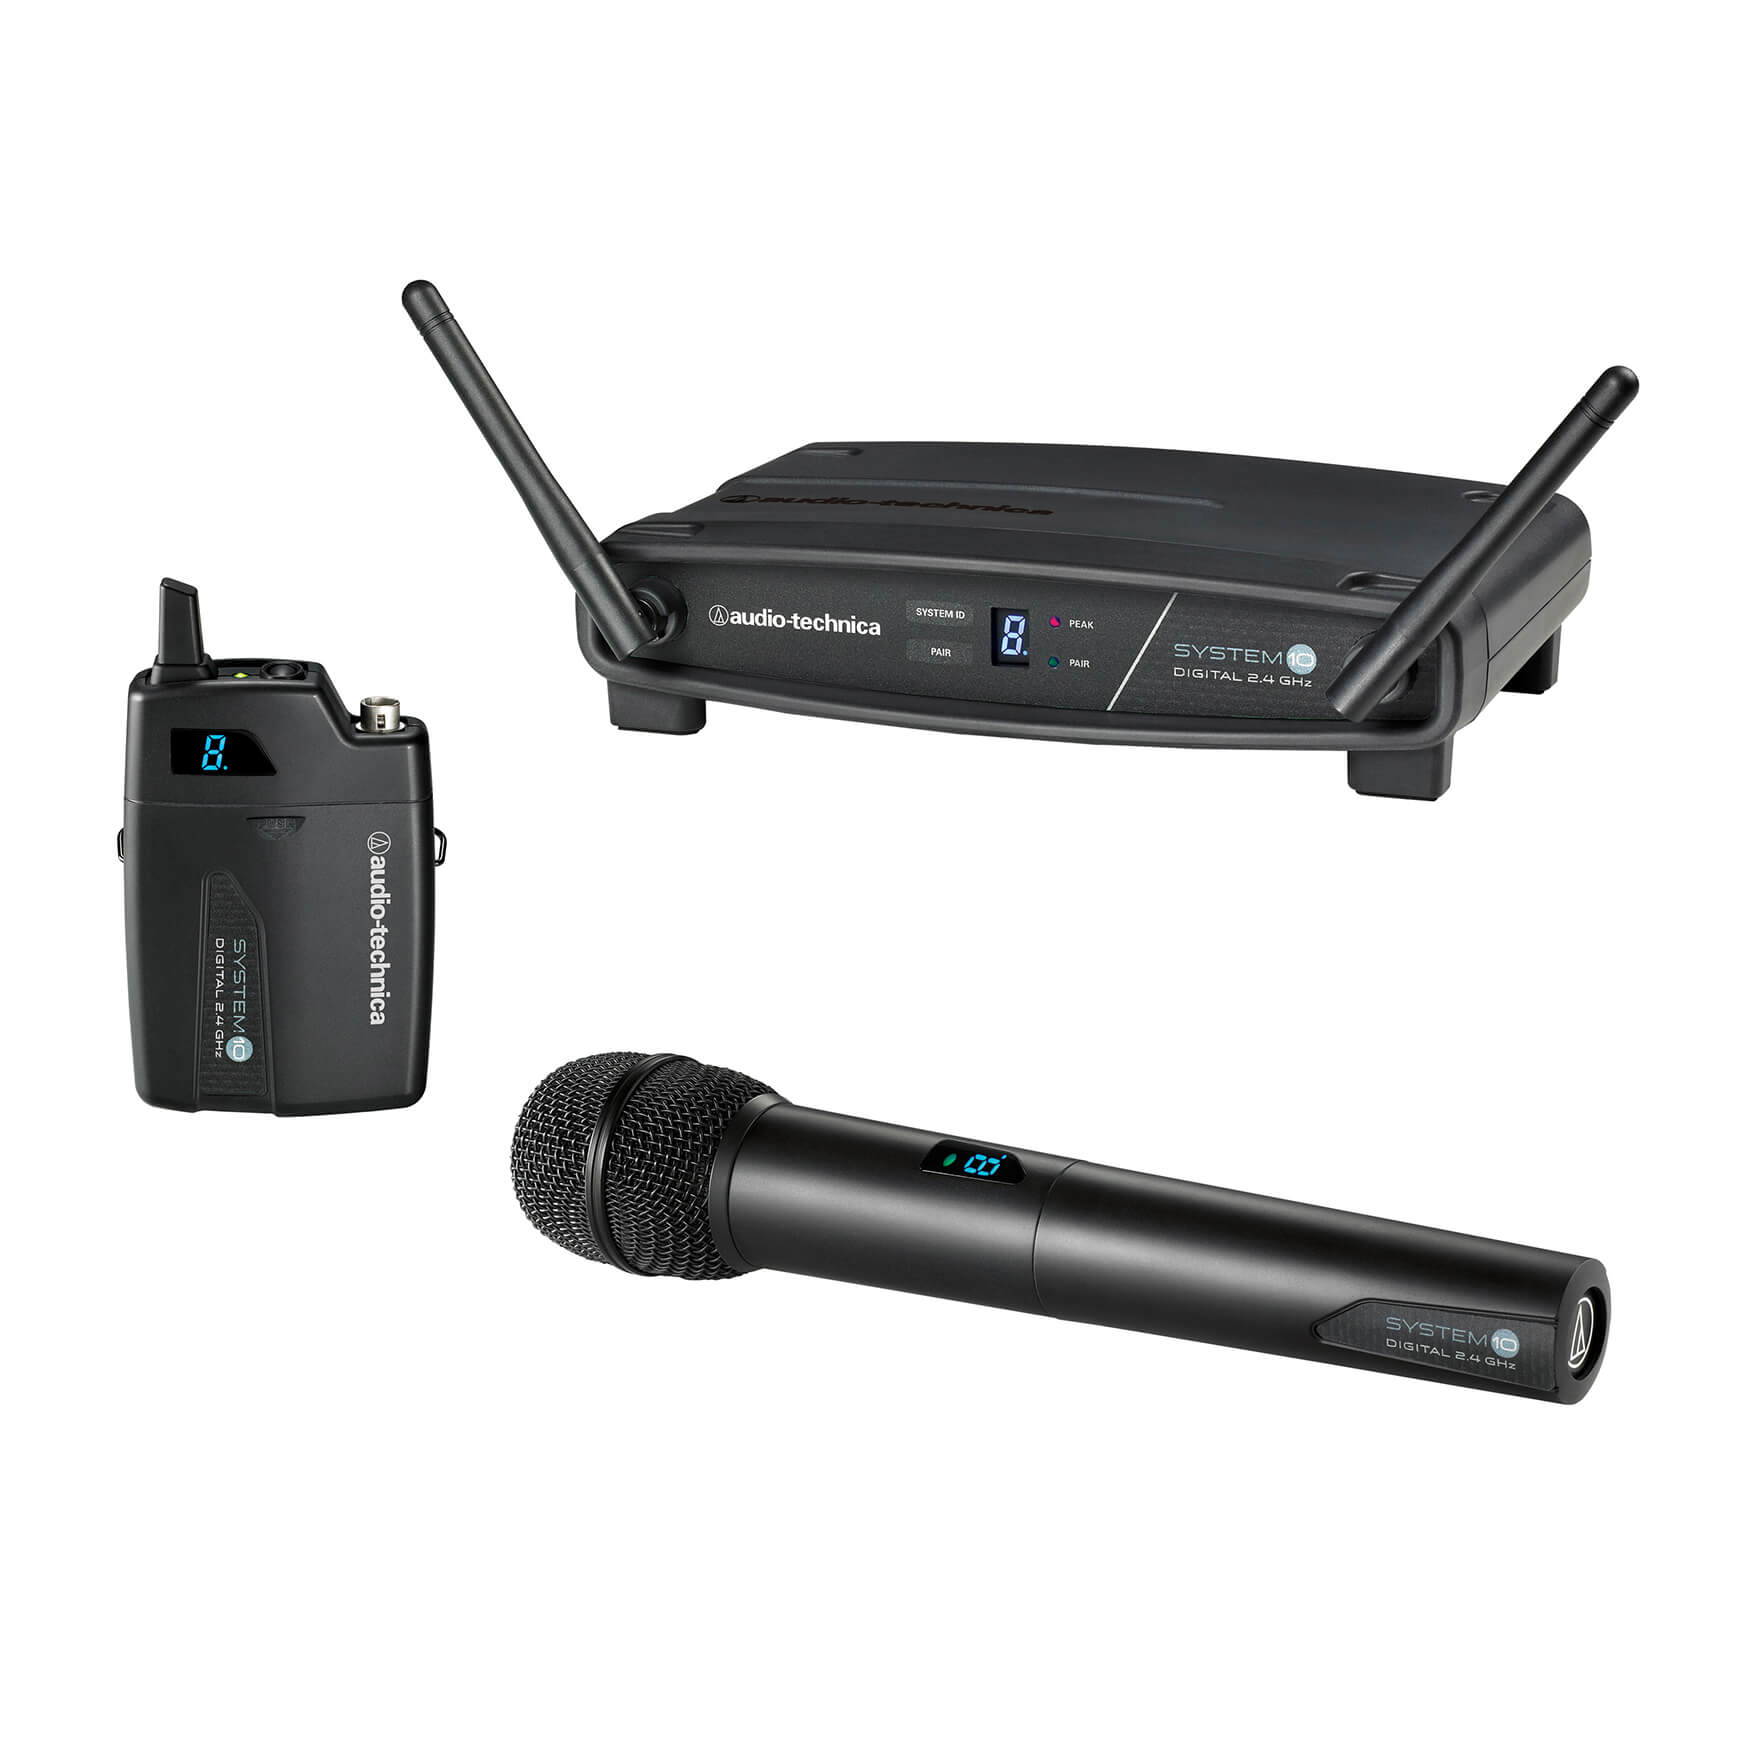 Audio-Technica Rebates on System 10 Wireless Systems Through the End of 2015